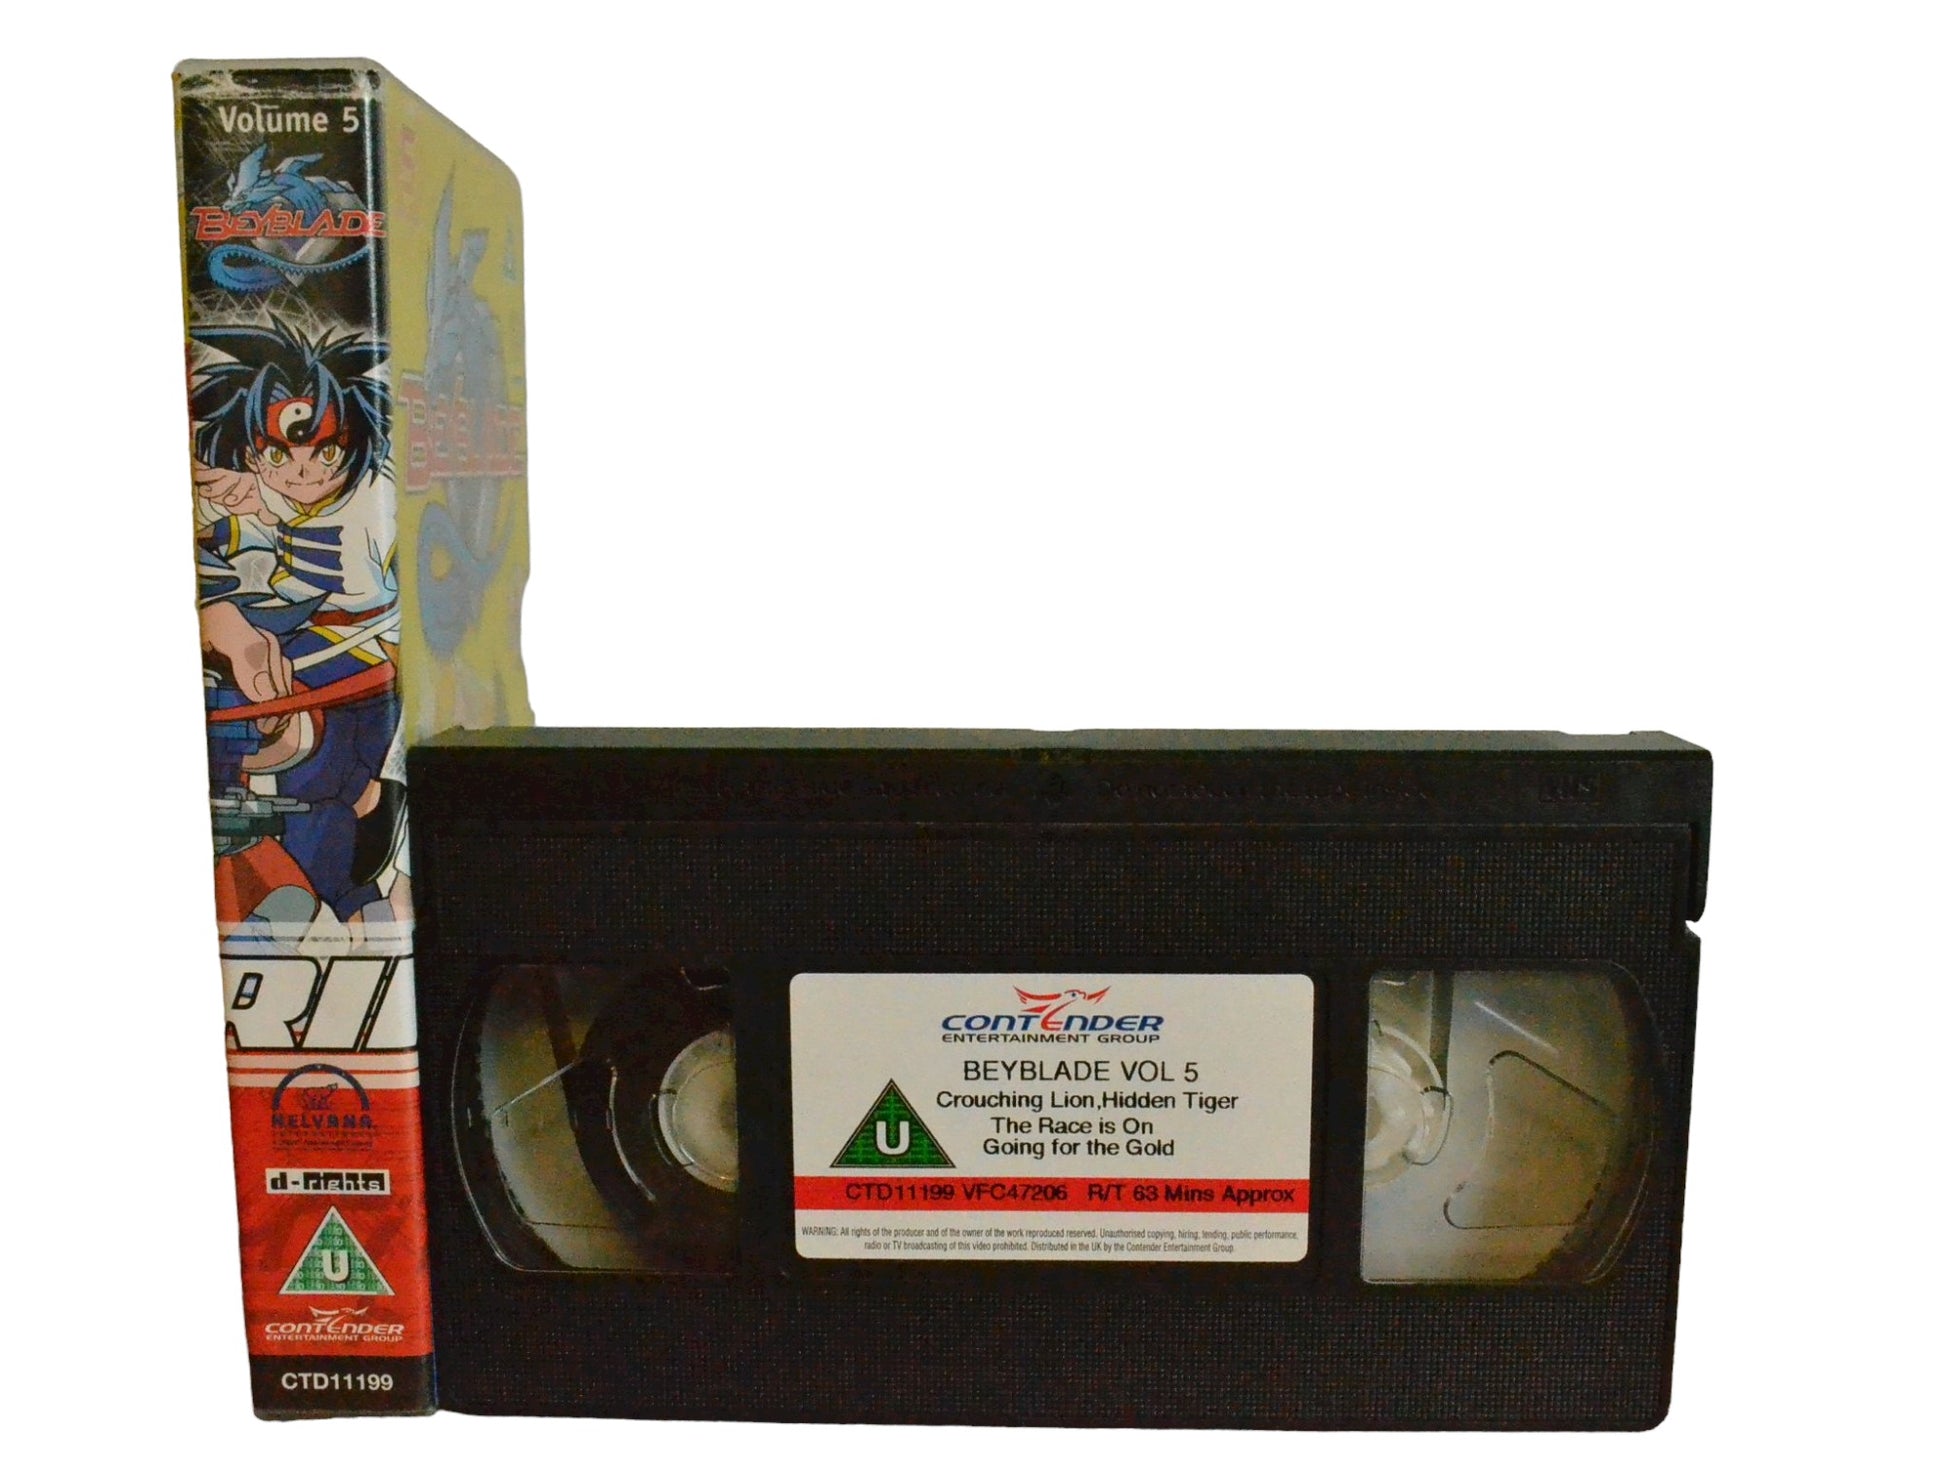 Beyblade - Let it RIP! - Volume 5 - Contender Entertainment Group - Childrens - PAL - VHS-